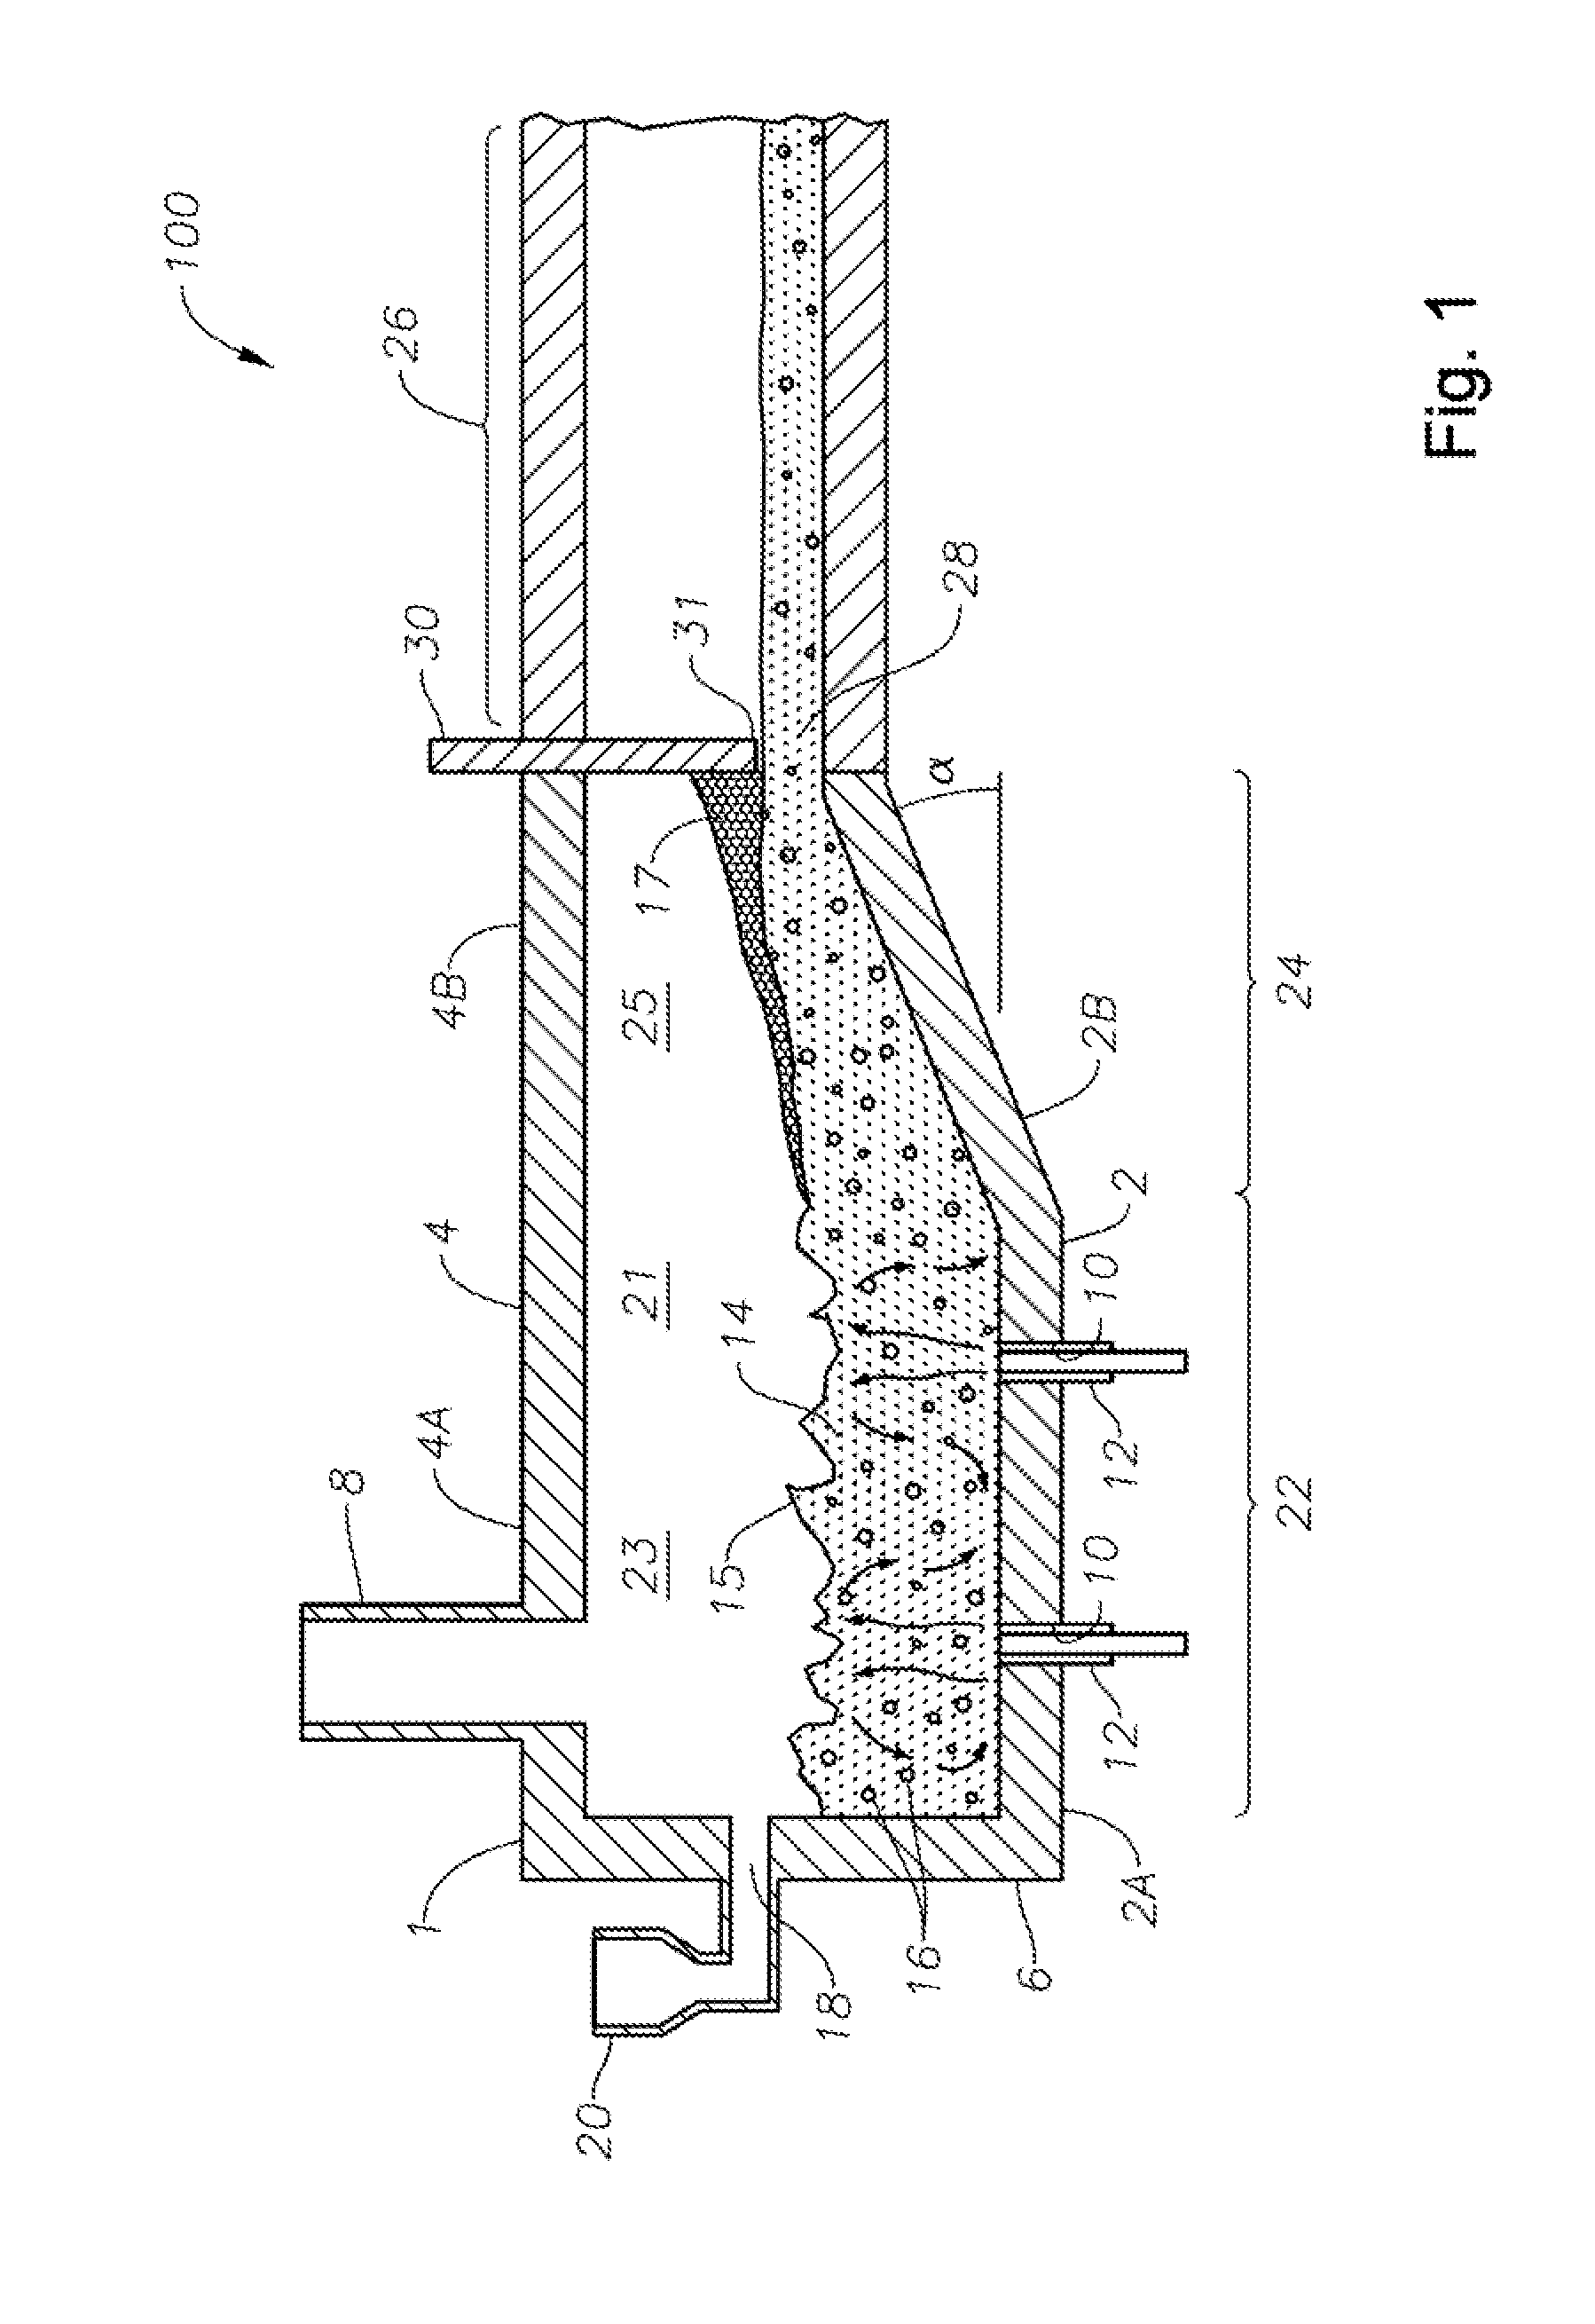 Submerged combustion melters having an extended treatment zone and methods of producing molten glass